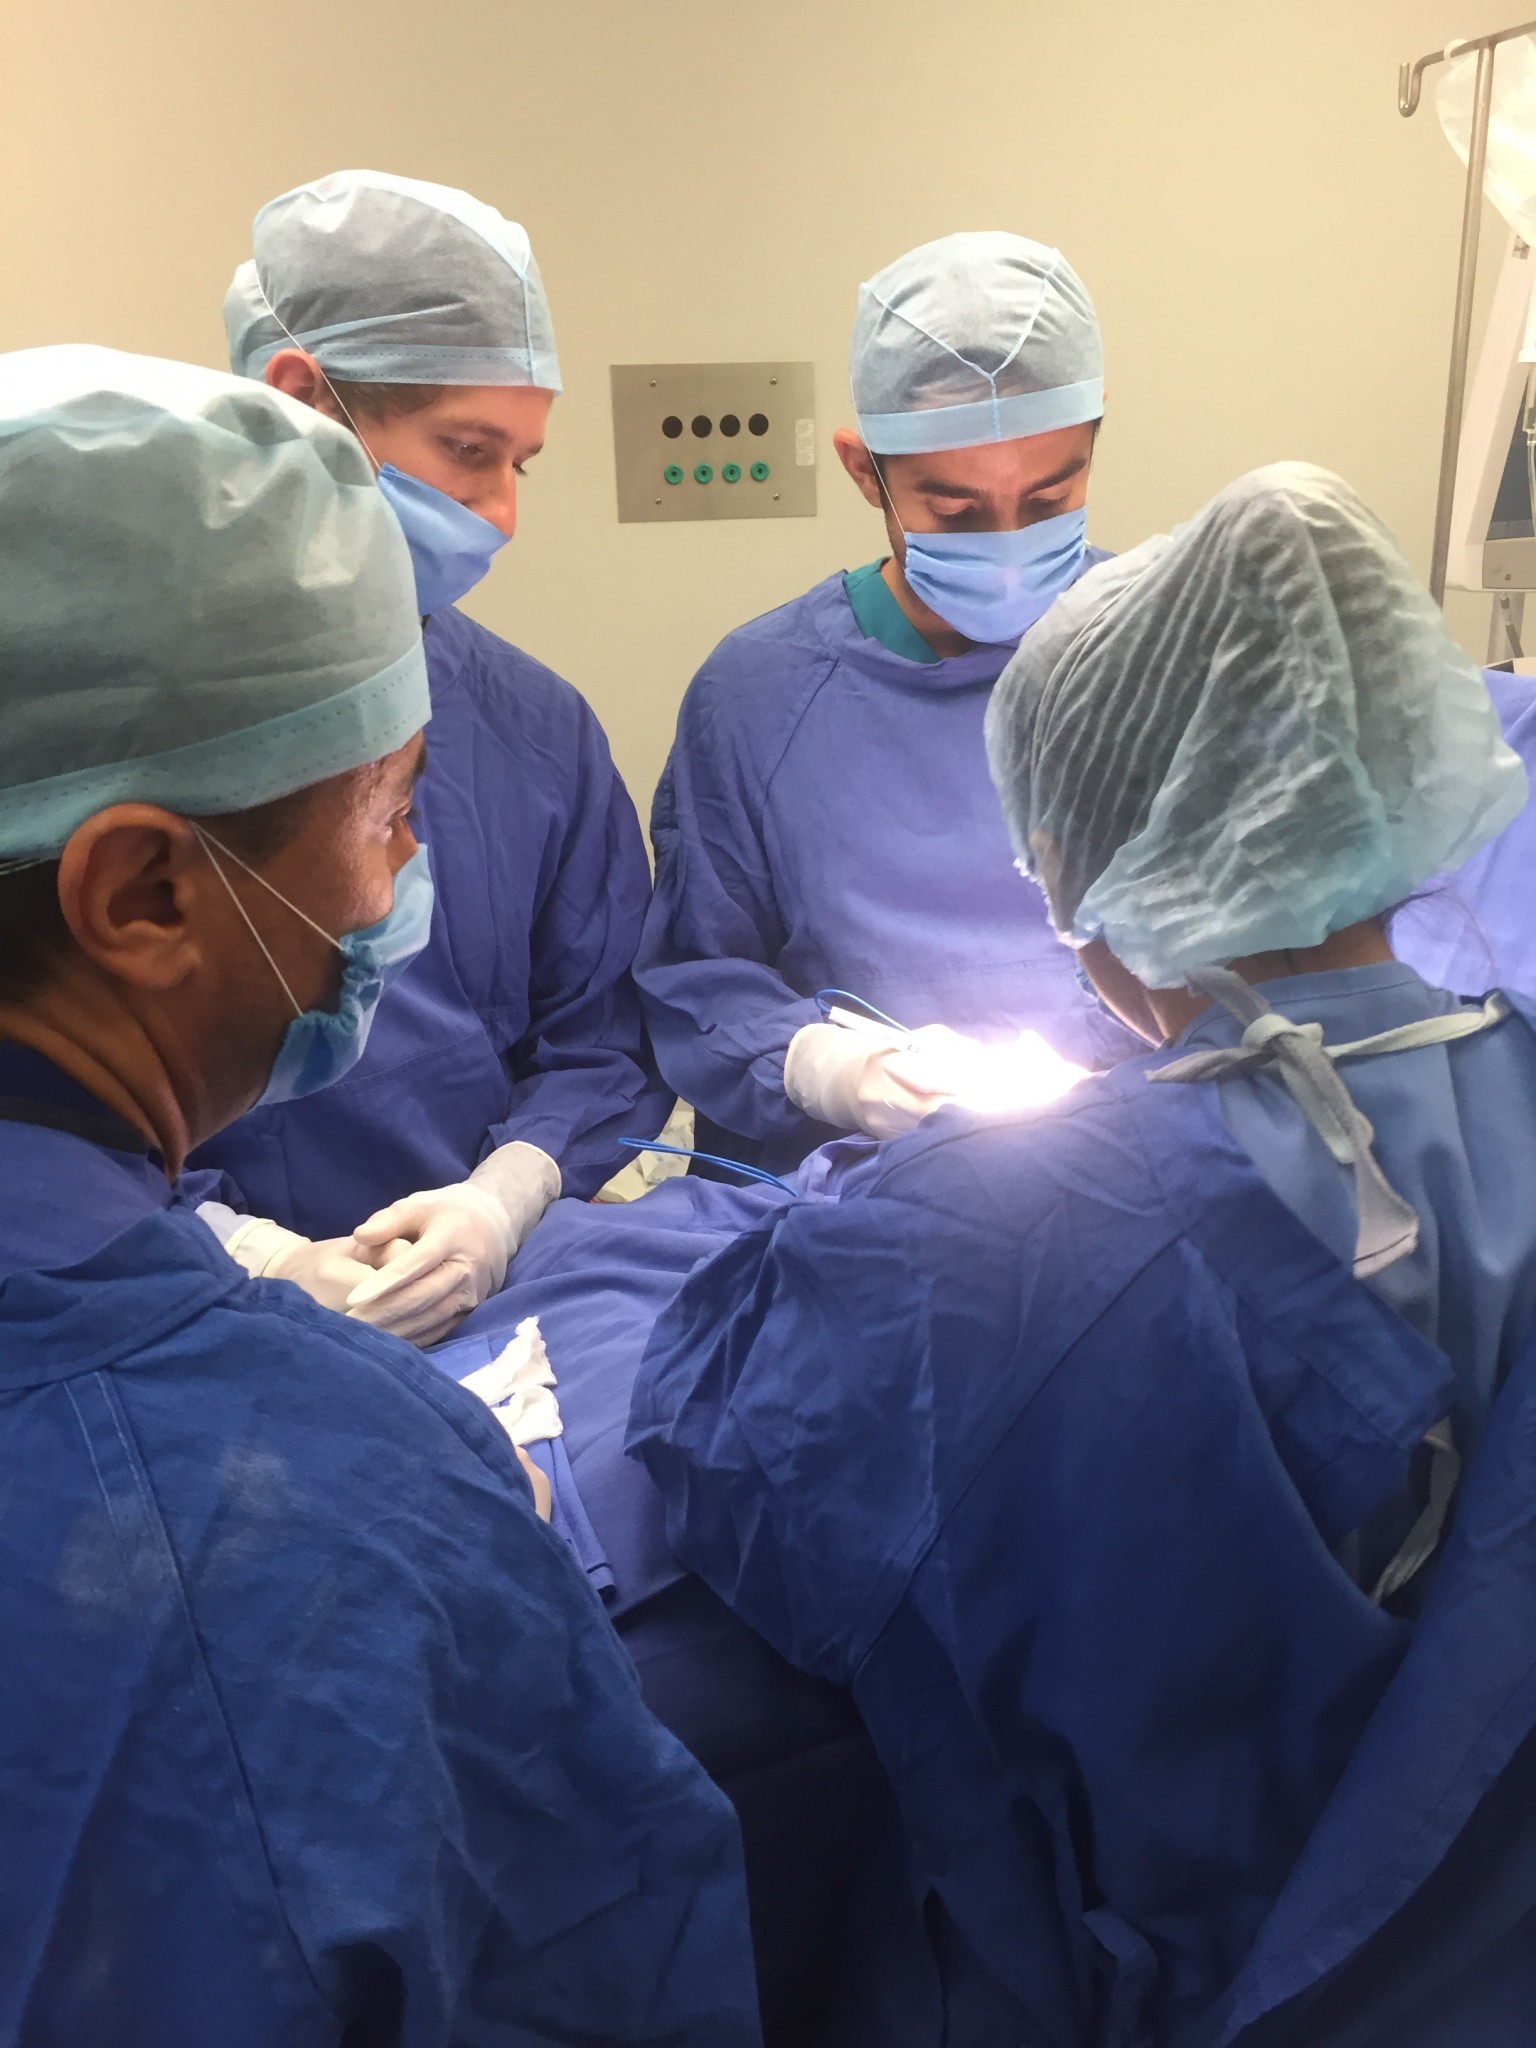 Surgical team in blue scrubs., doing surgery.